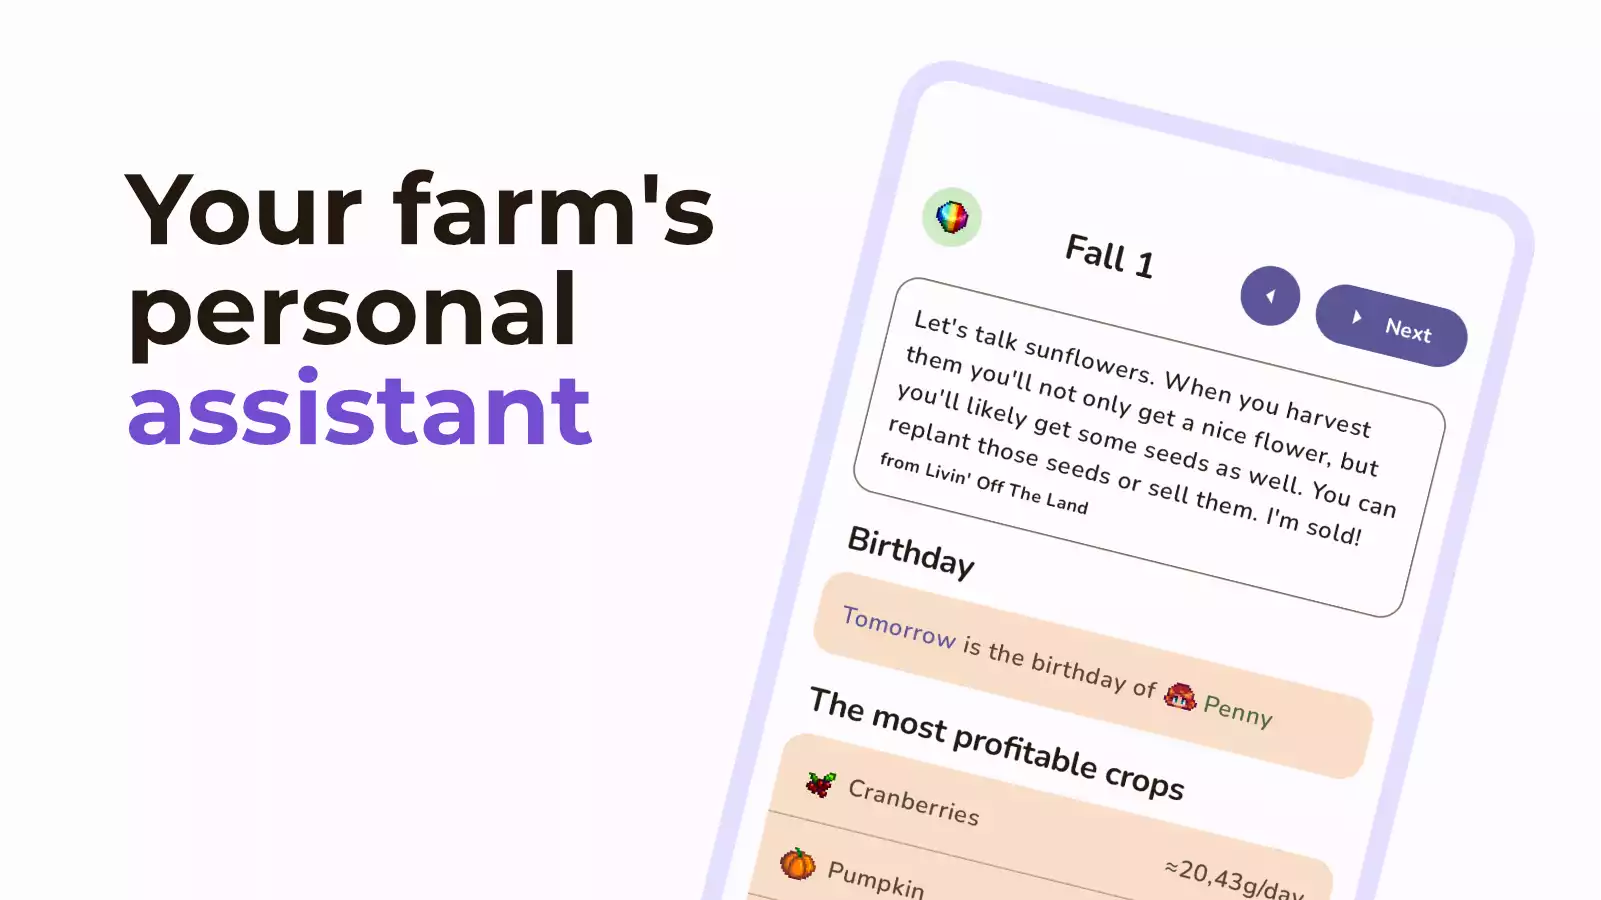 Your farm's personal assistant